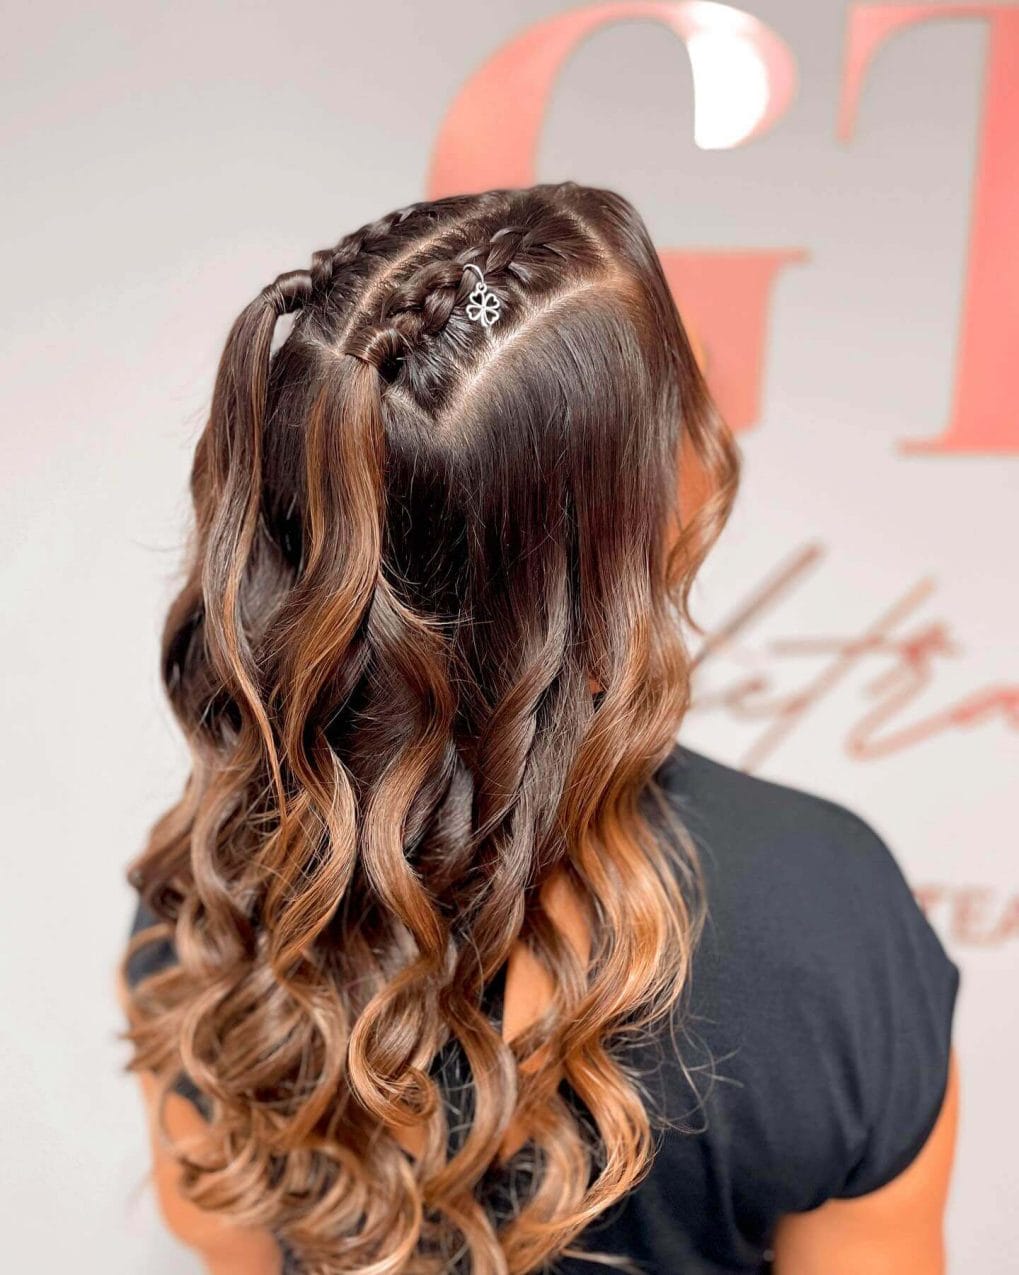 Side-swept braid twists into deep chocolate brown waves framing the face